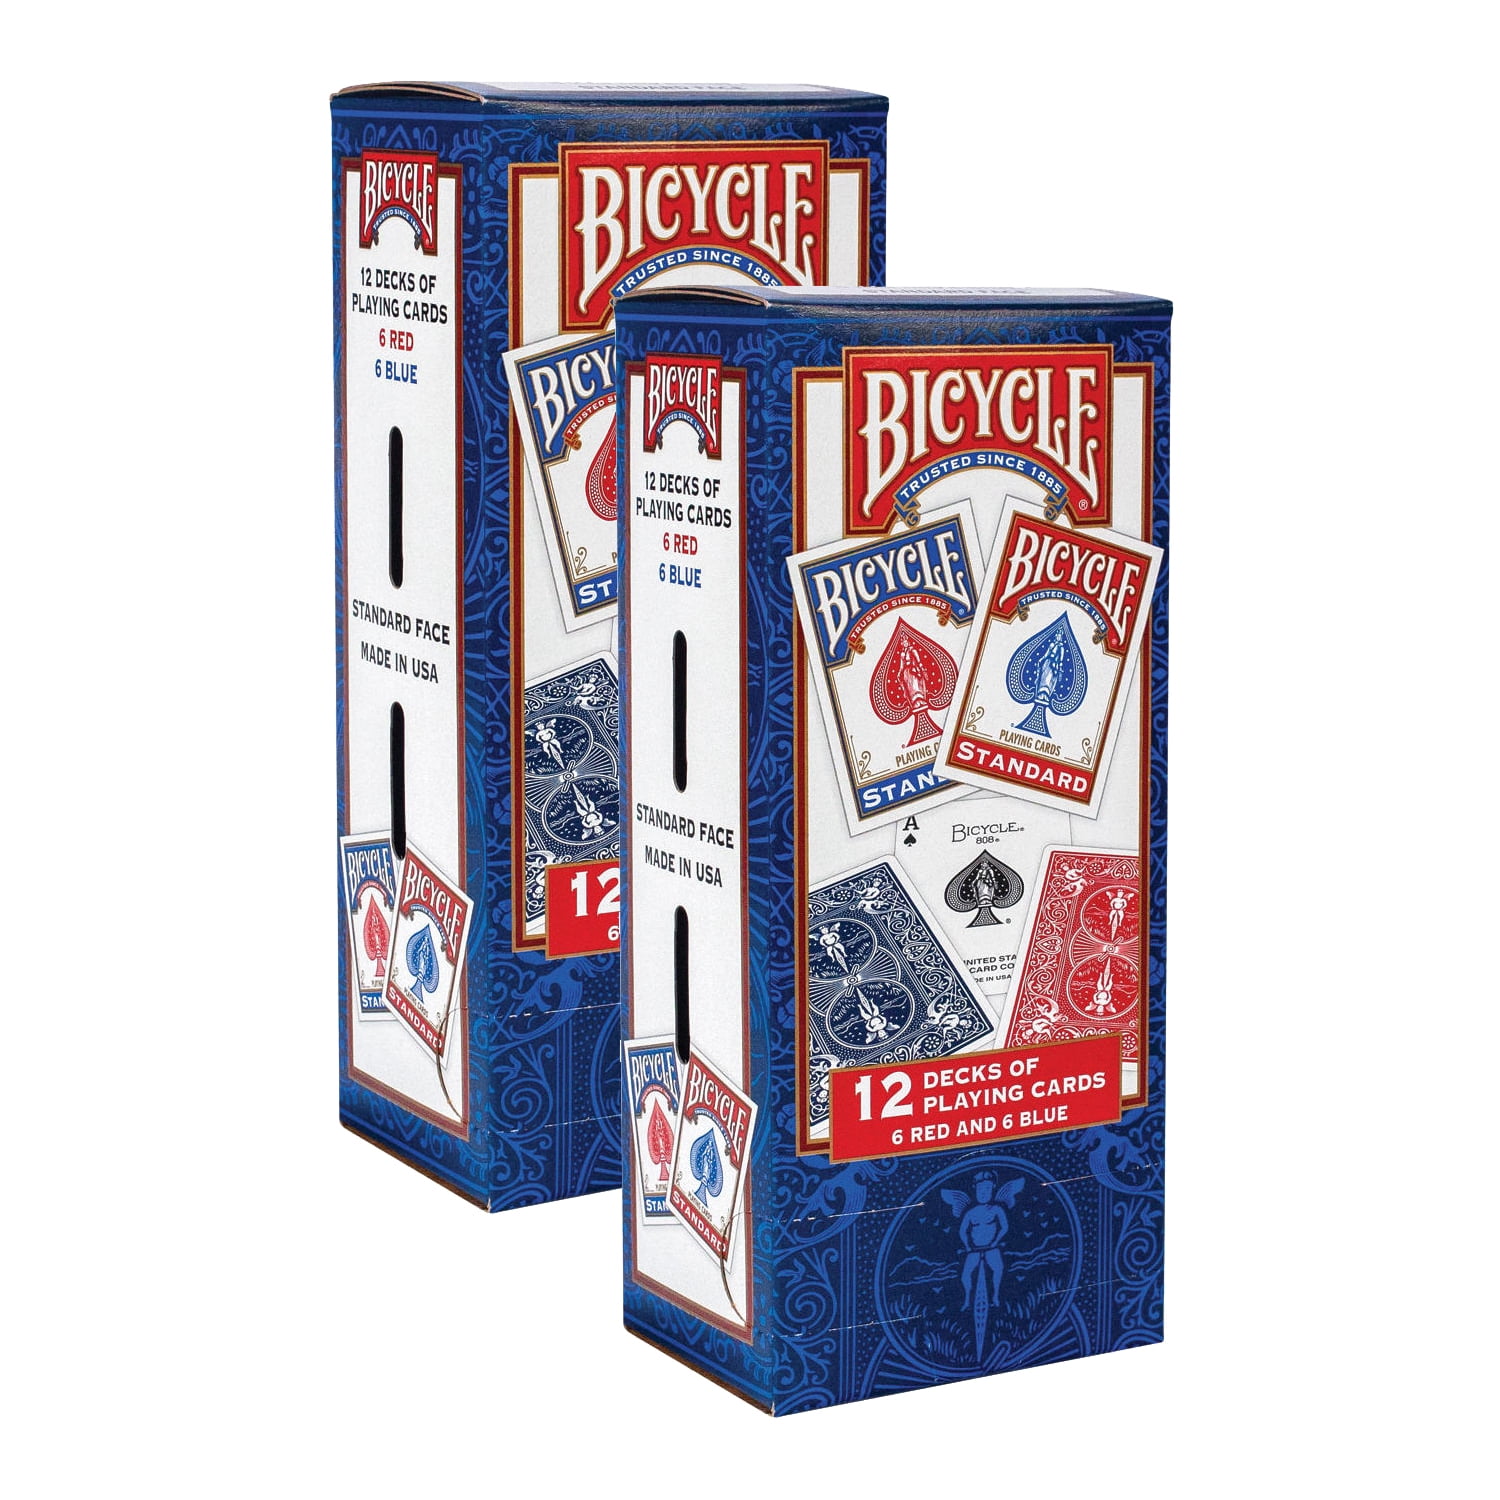 Bicycle Poker Size Standard Index Playing Cards 1 ea Pack of 5 